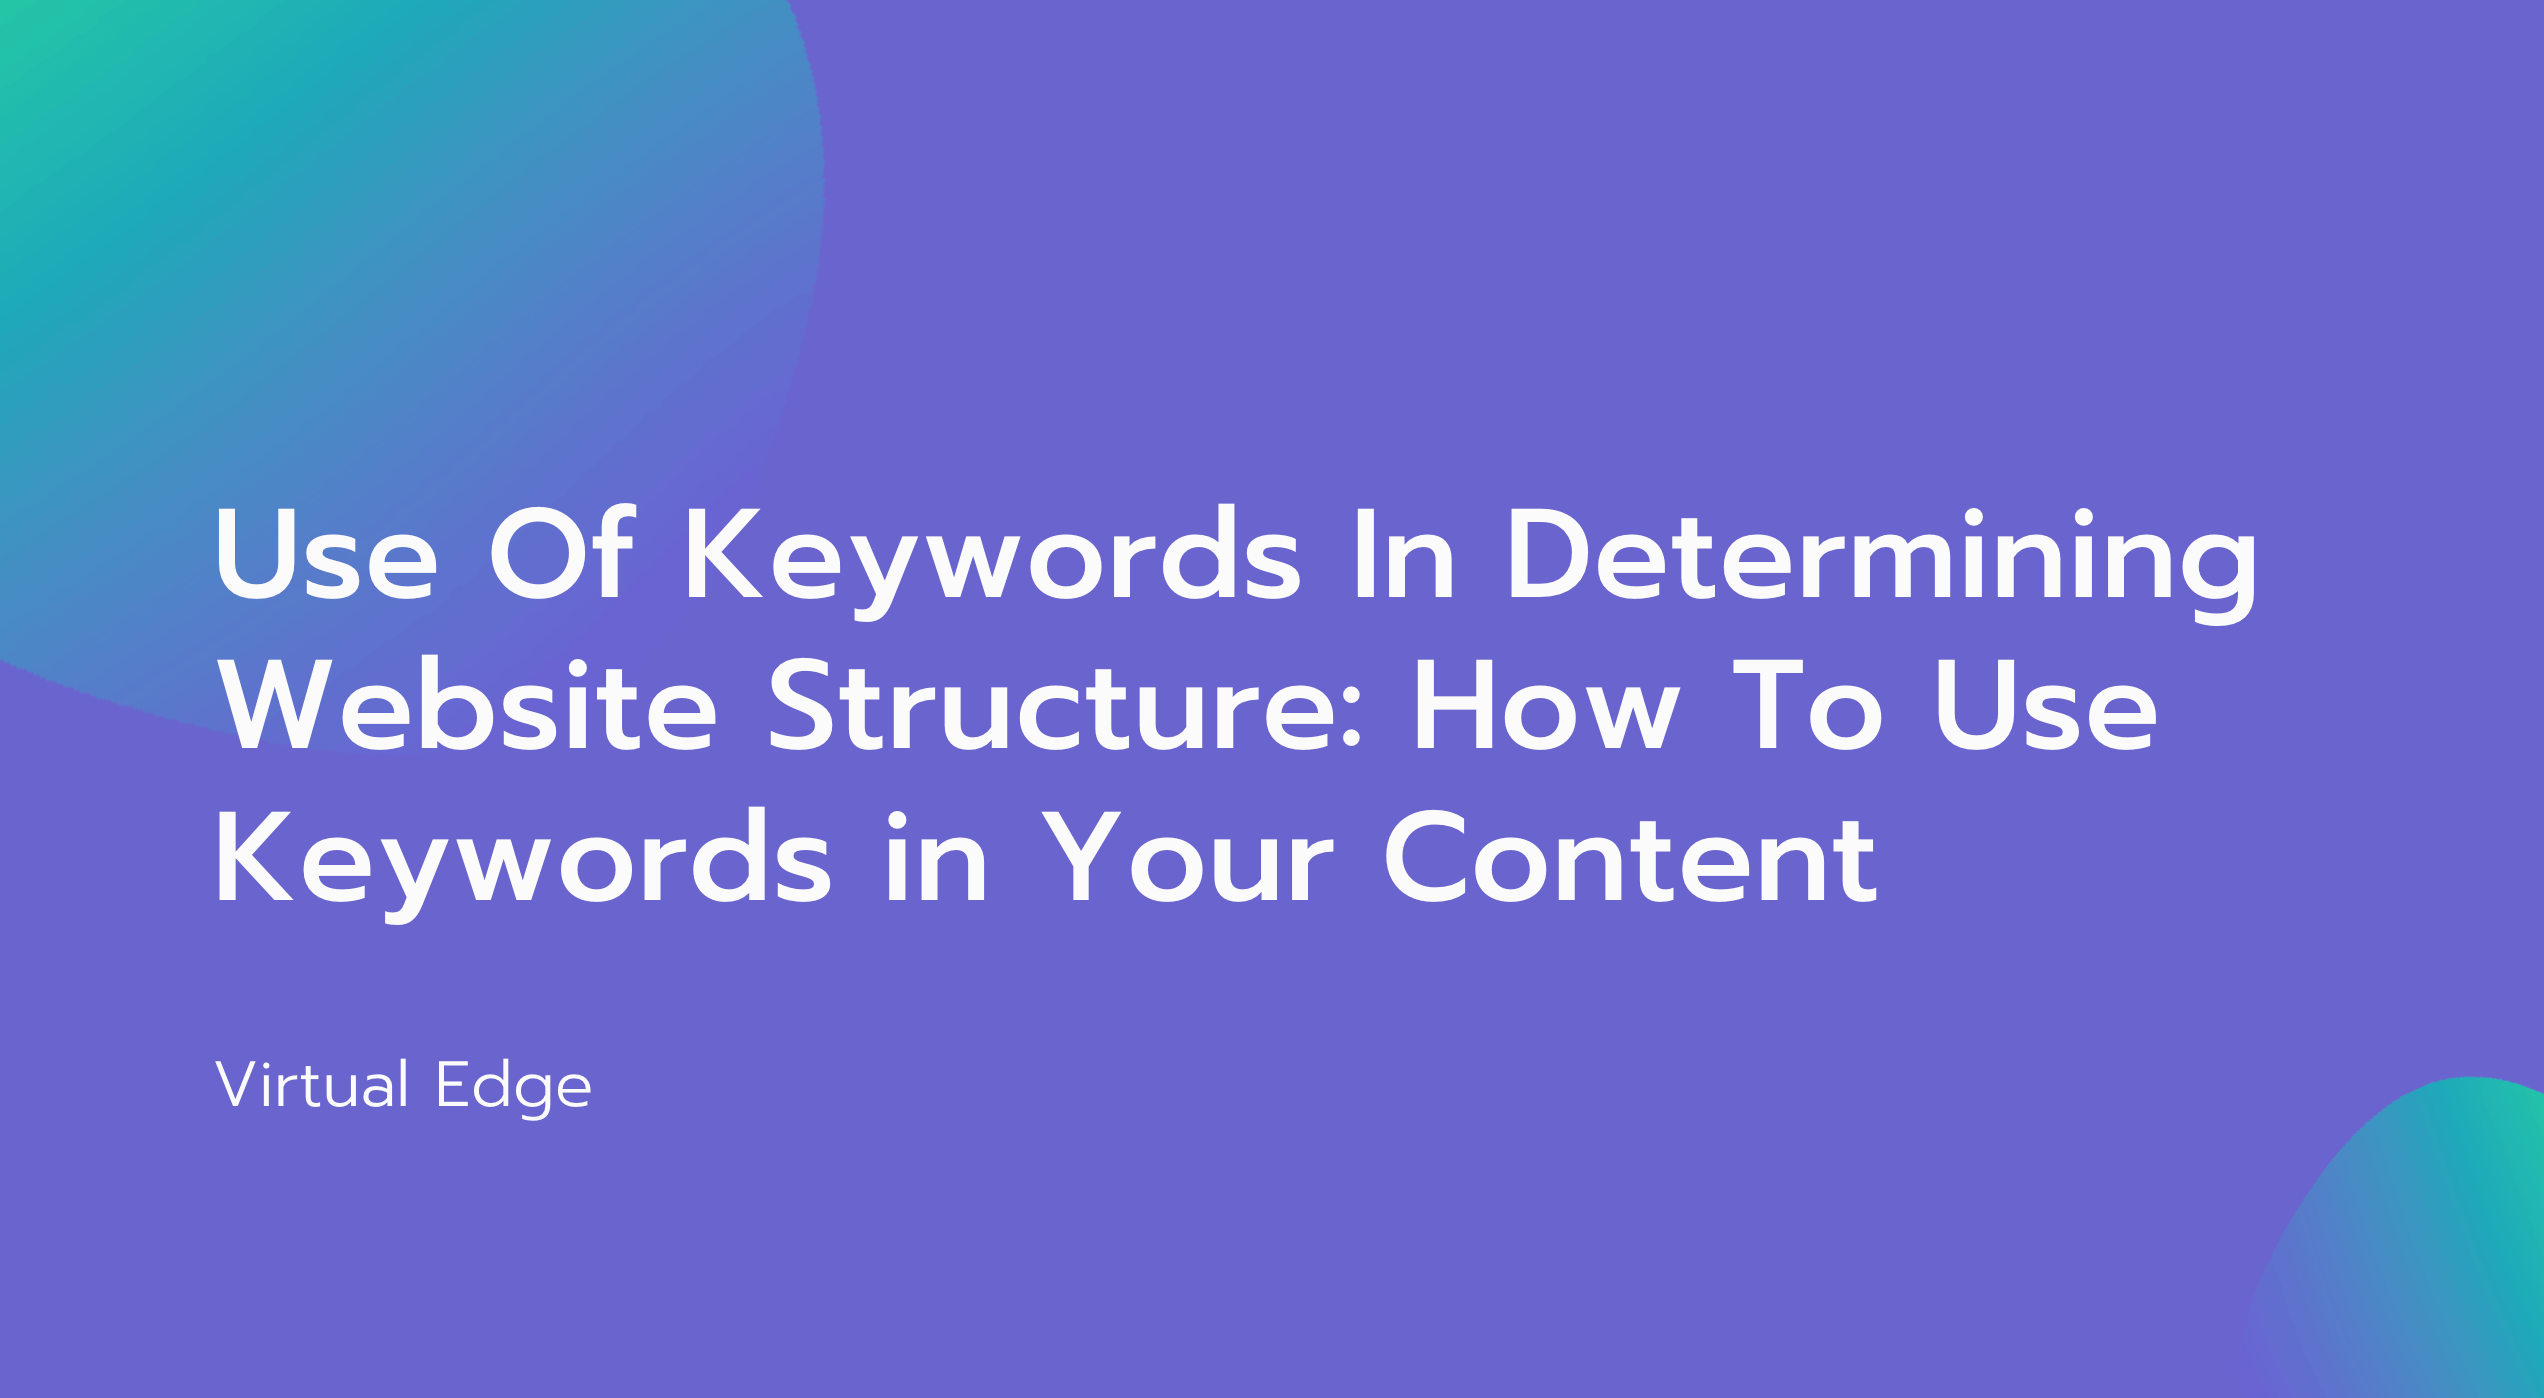 Use Of Keywords In Determining Website Structure: How To Use Keywords in Your Content